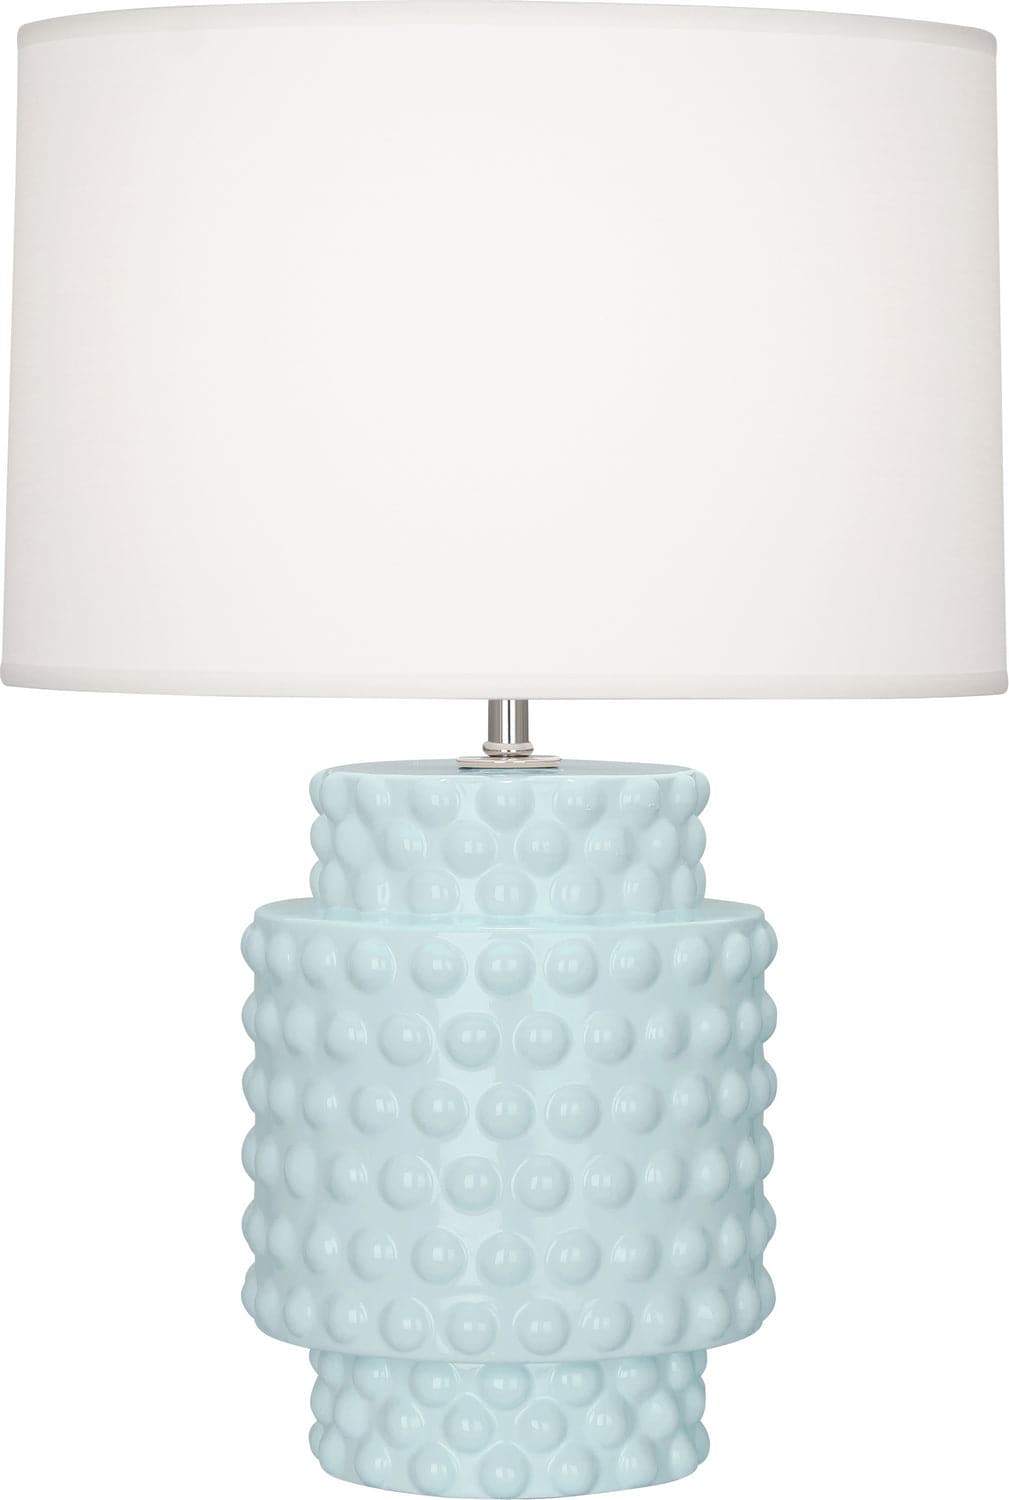 Robert Abbey - BB801 - One Light Accent Lamp - Dolly - Baby Blue Glazed Textured